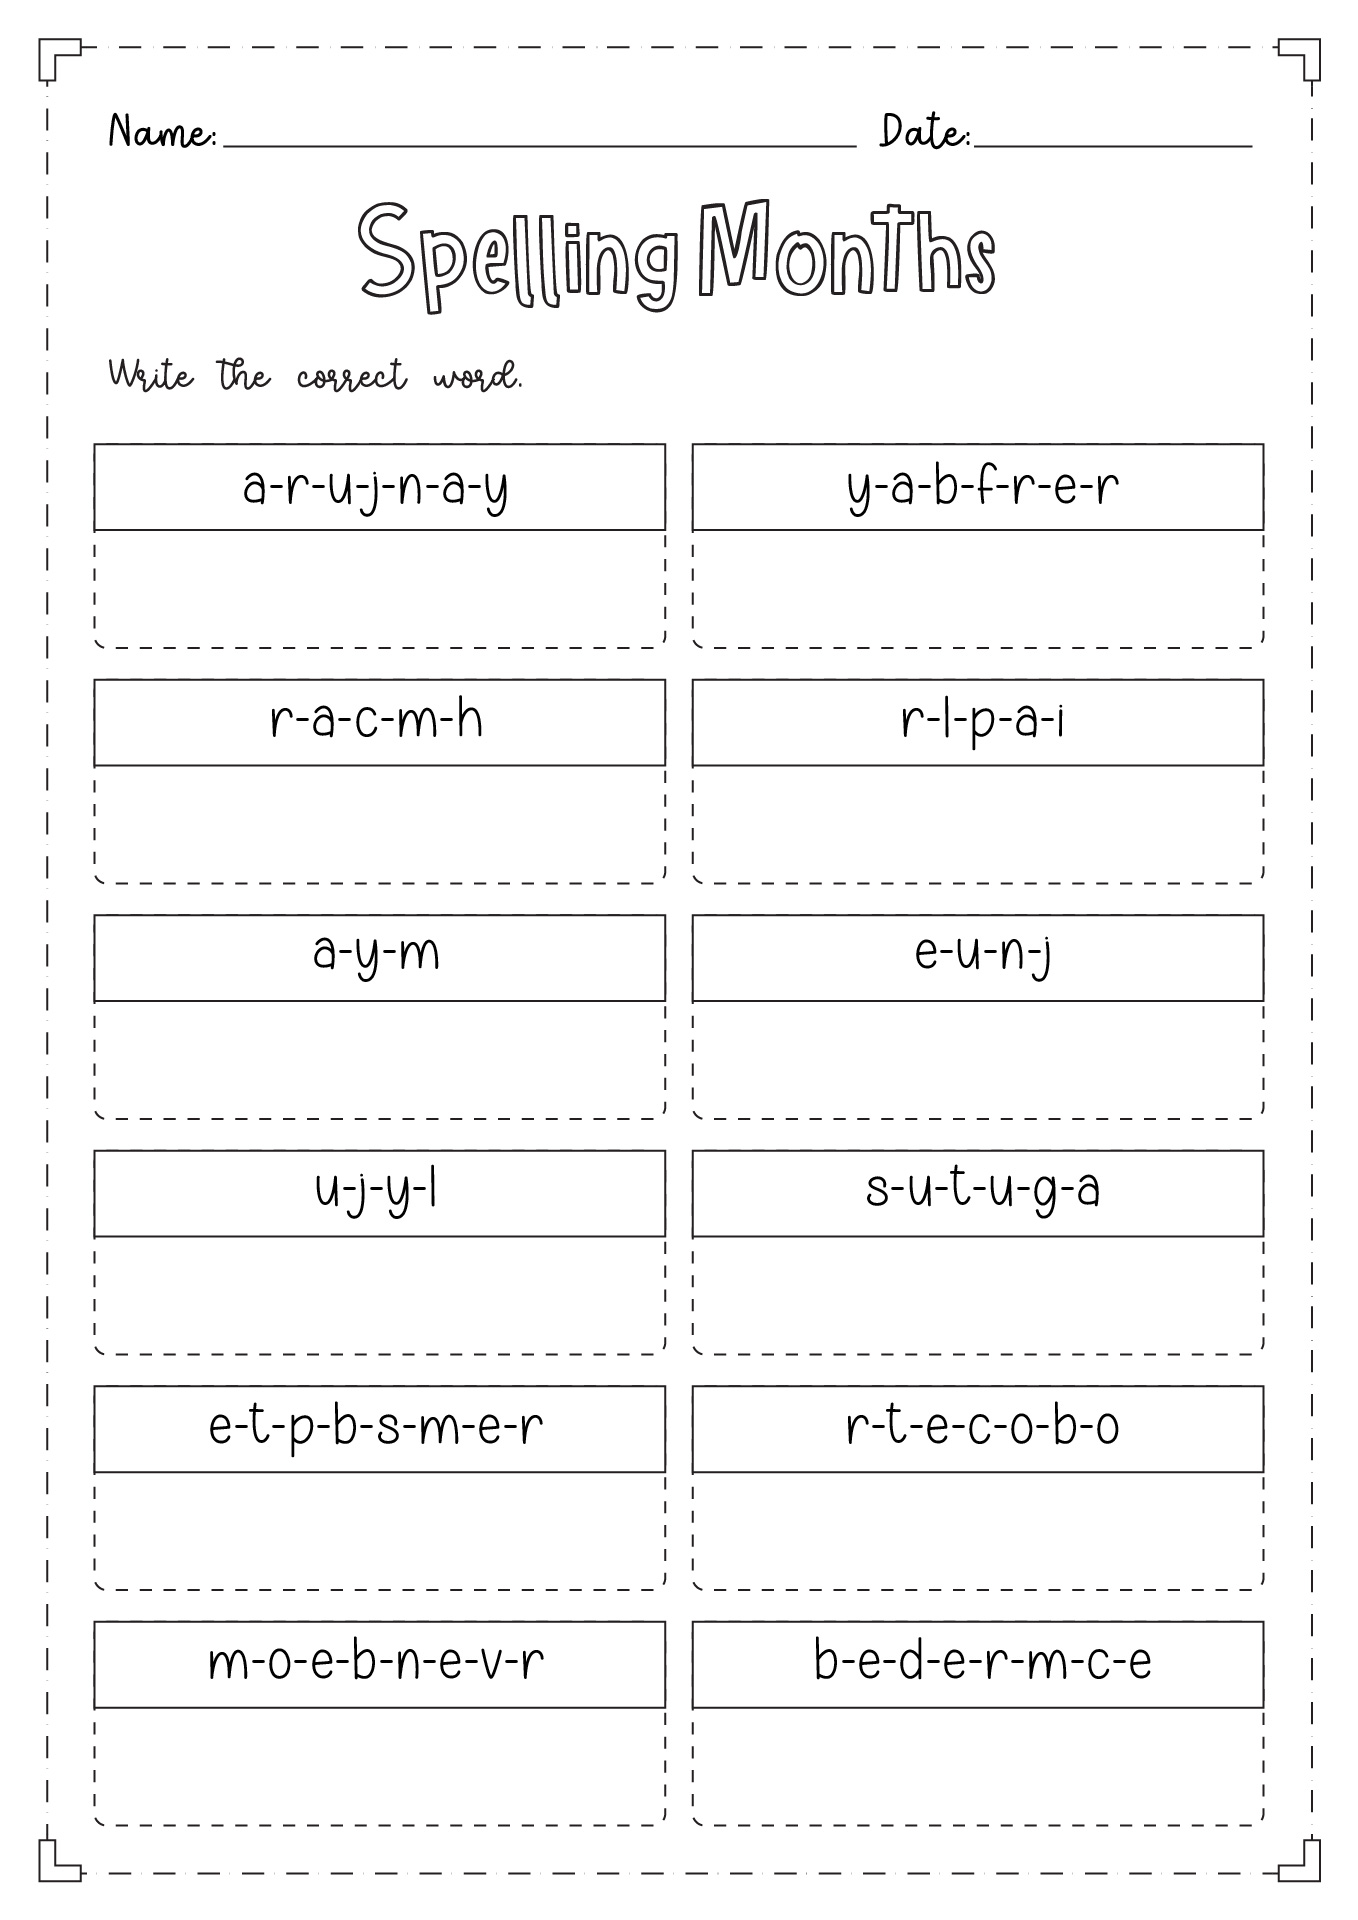 Months of the Year Spelling Worksheet